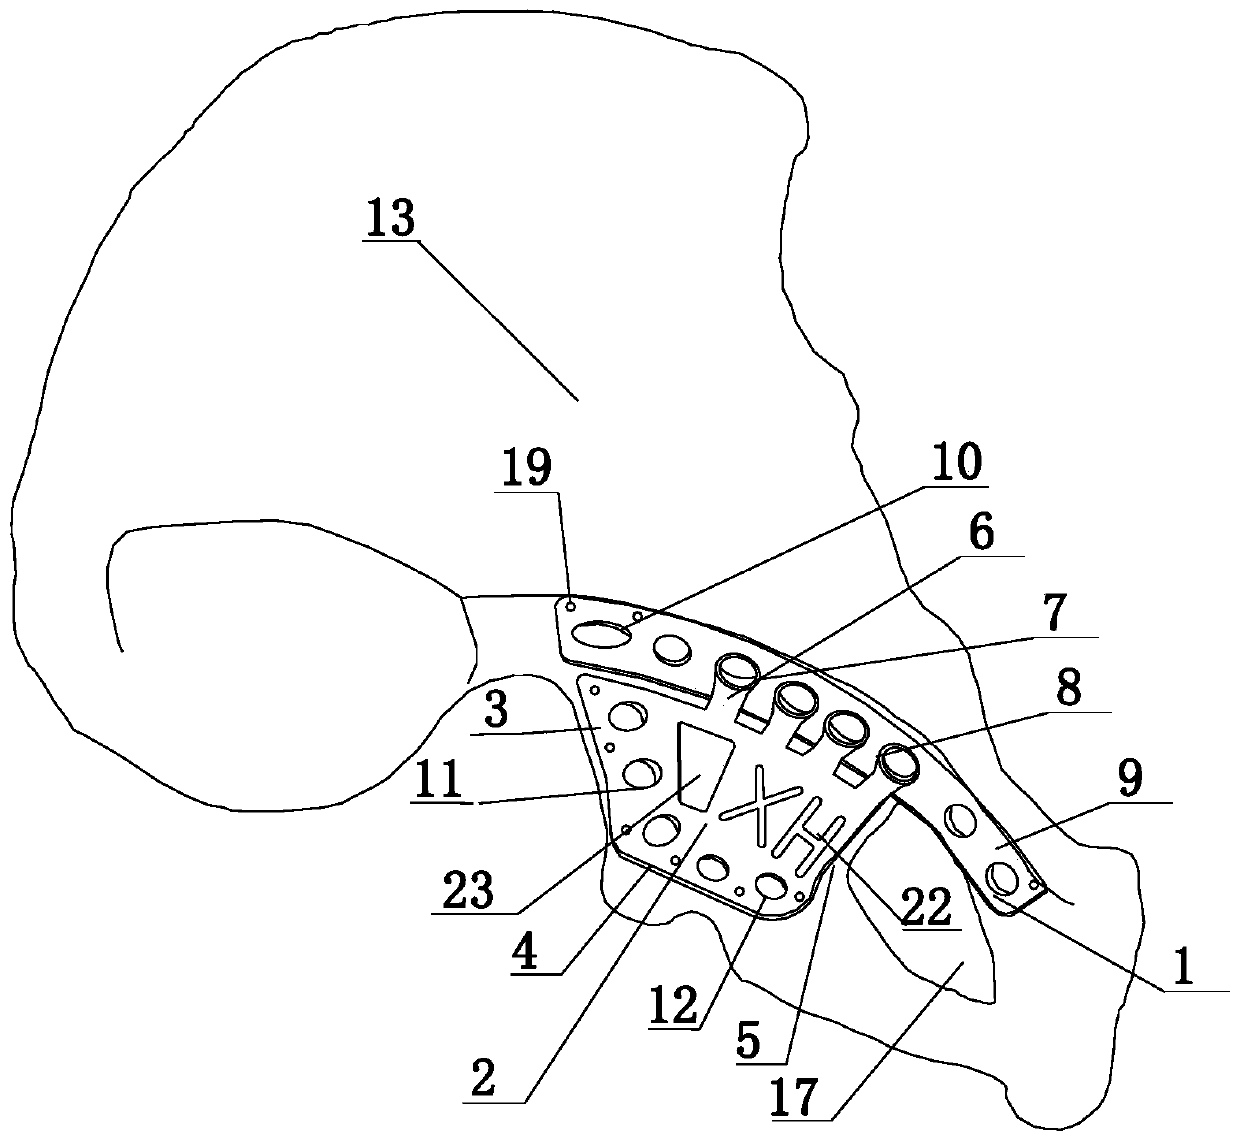 Fixation devices for acetabular anterior and posterior column fractures